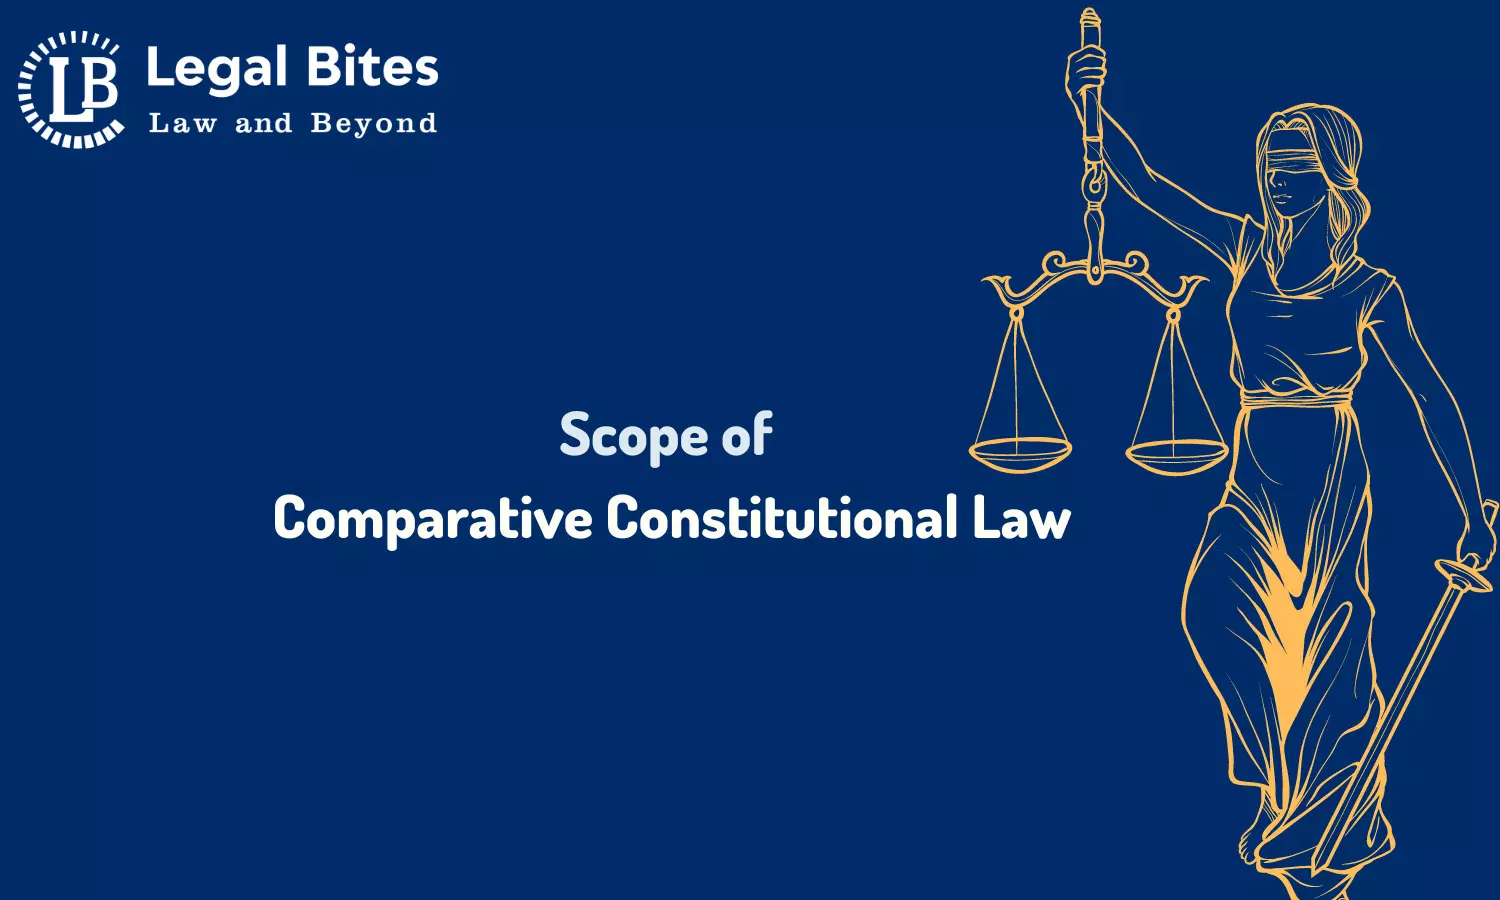 Scope of Comparative Constitutional Law